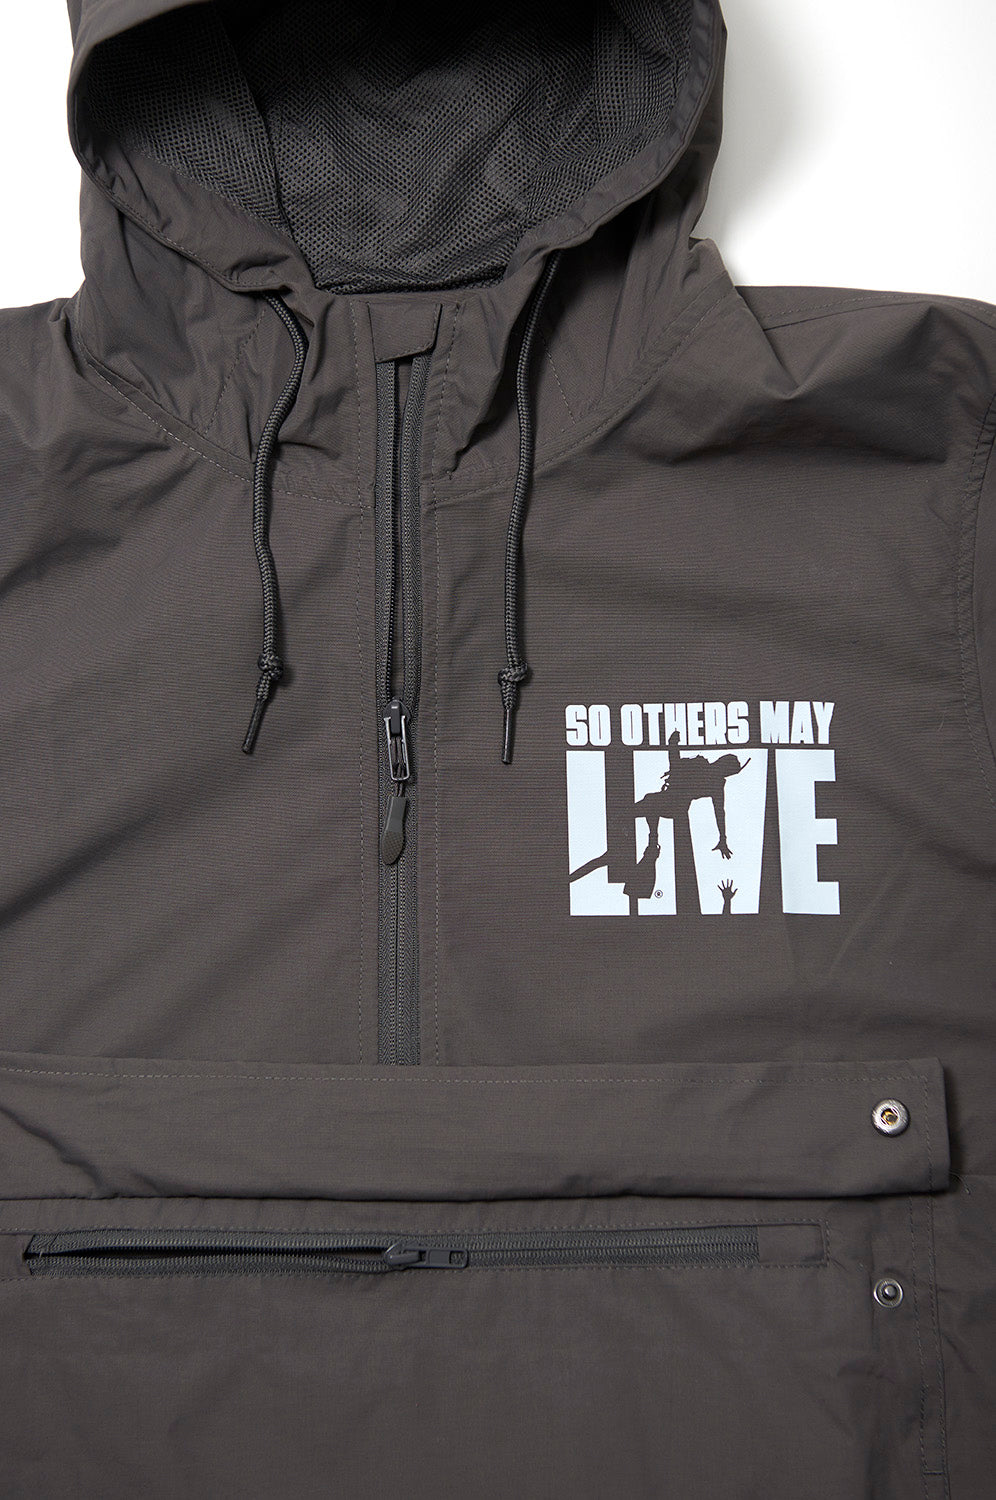 So Others May Live - Anorak Jacket